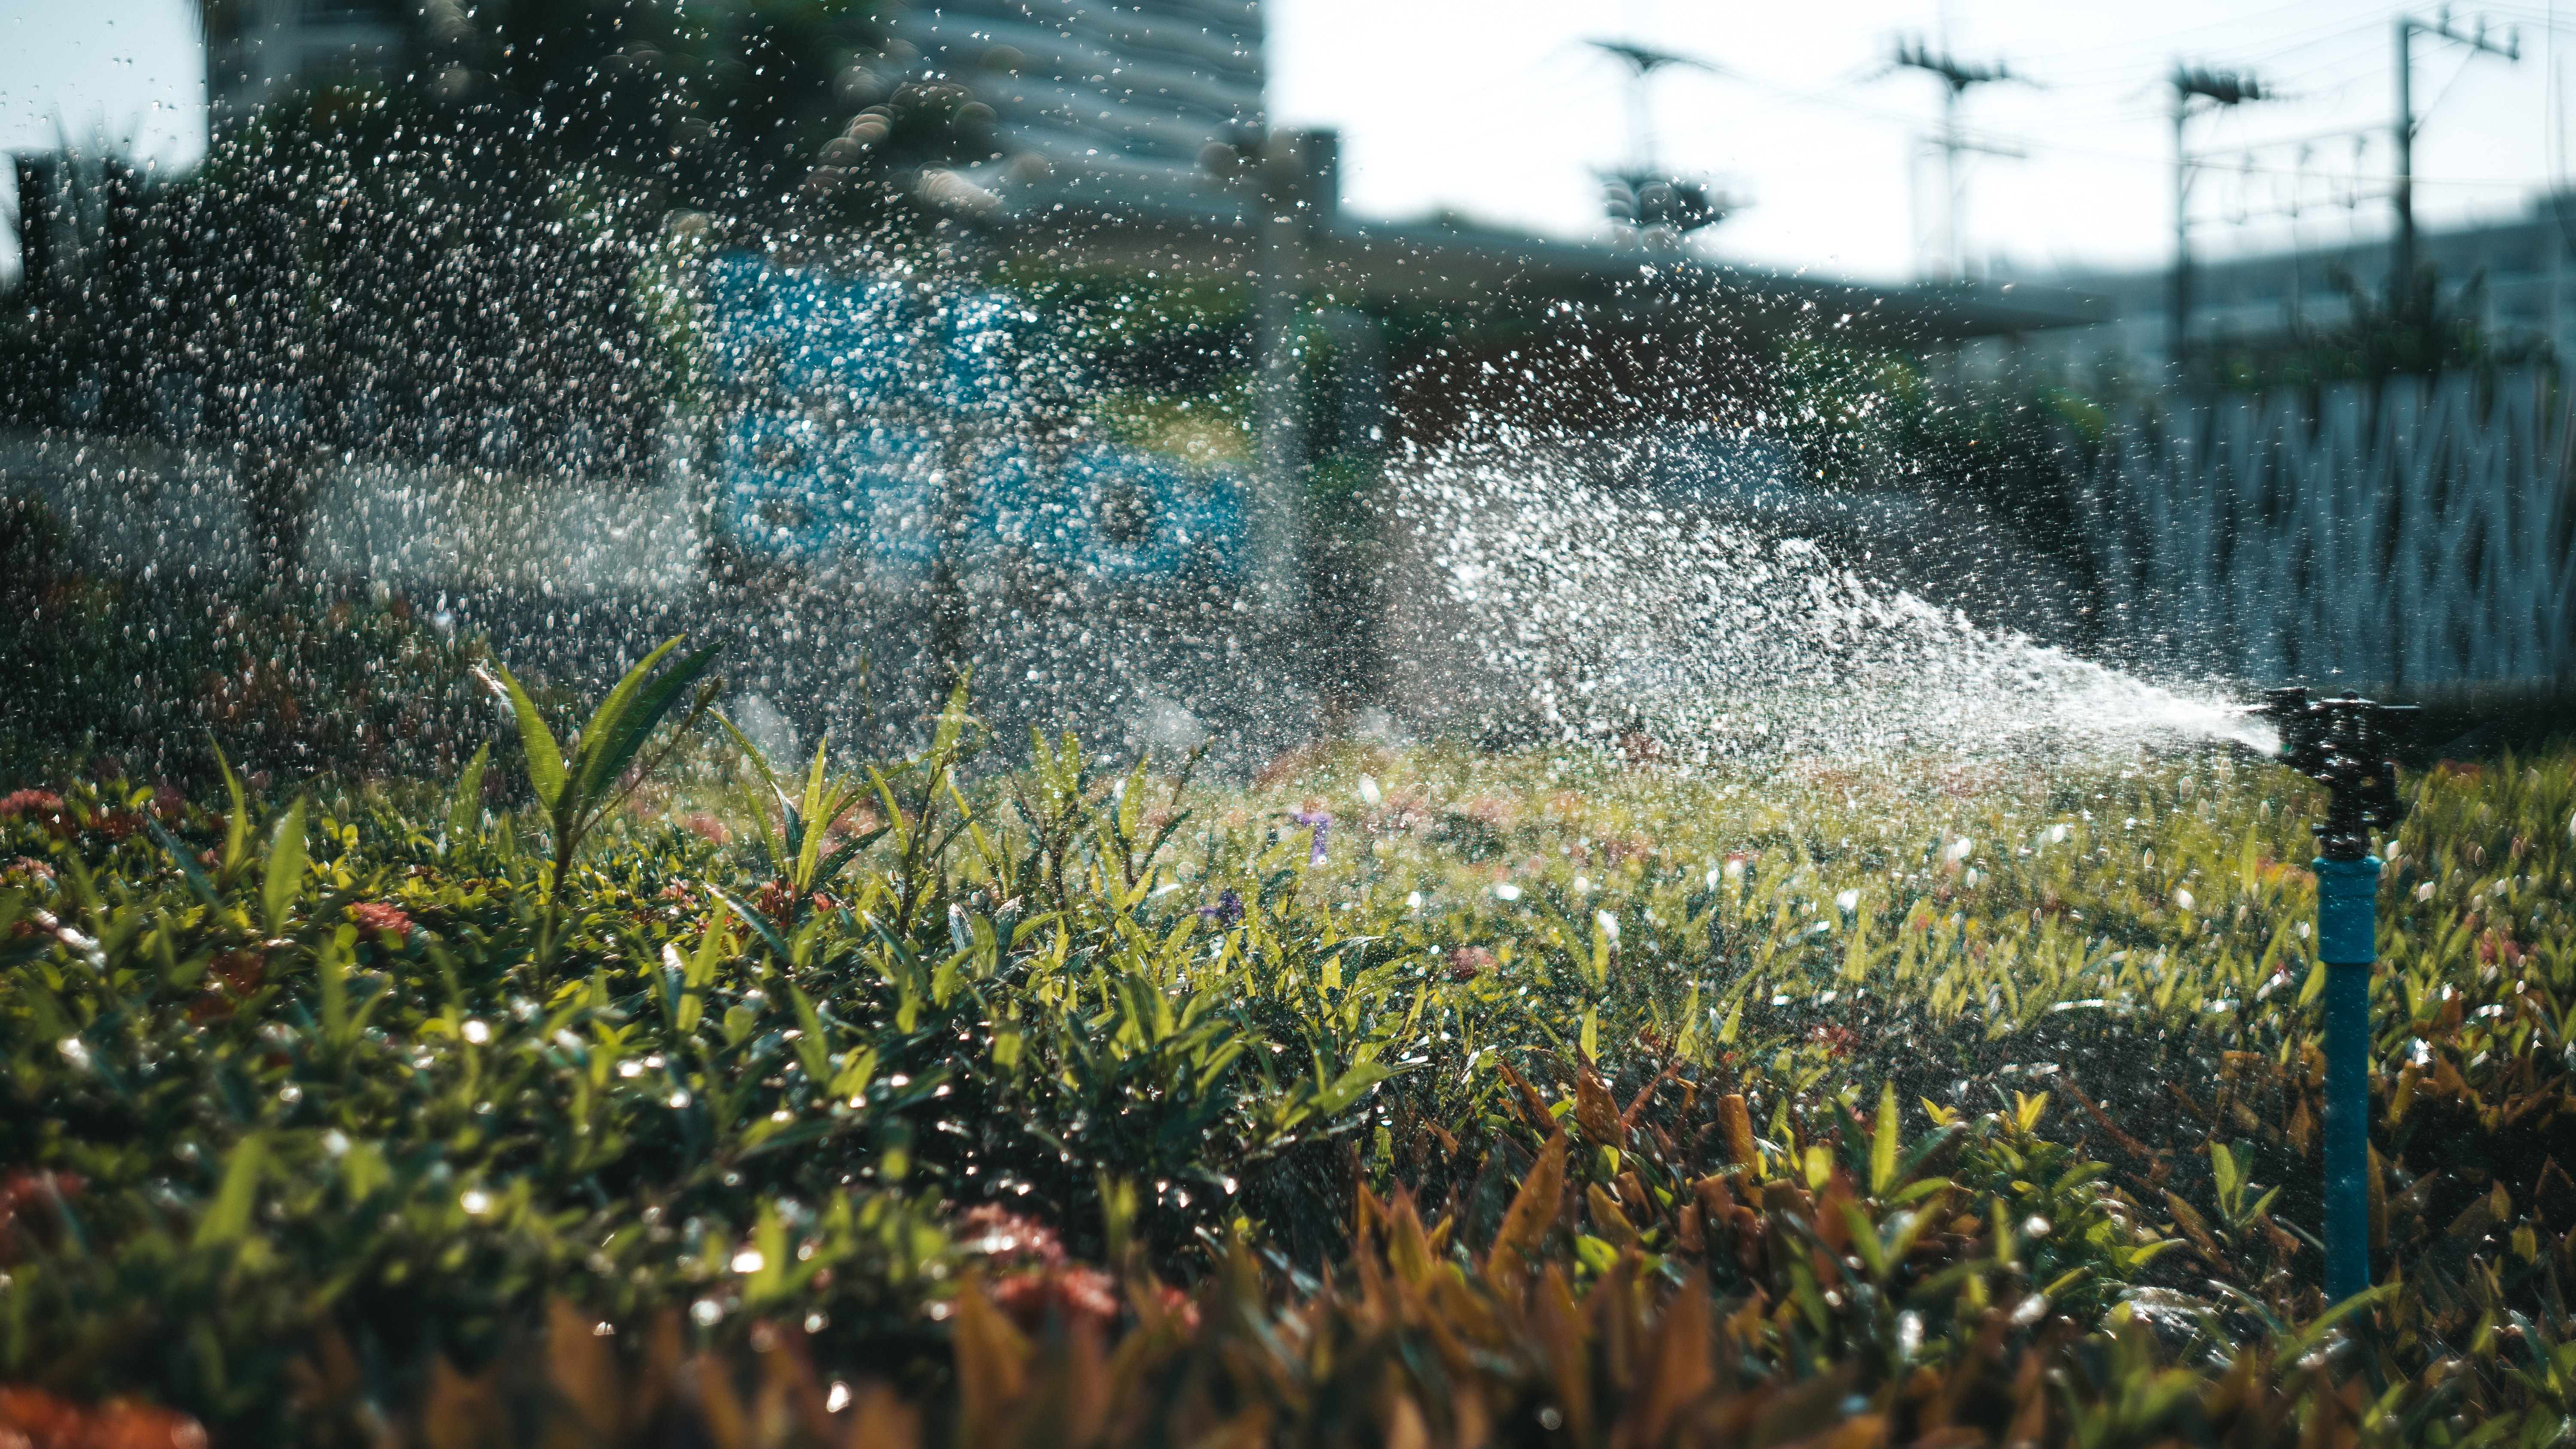 Why aren't My Lawn Sprinklers Working?